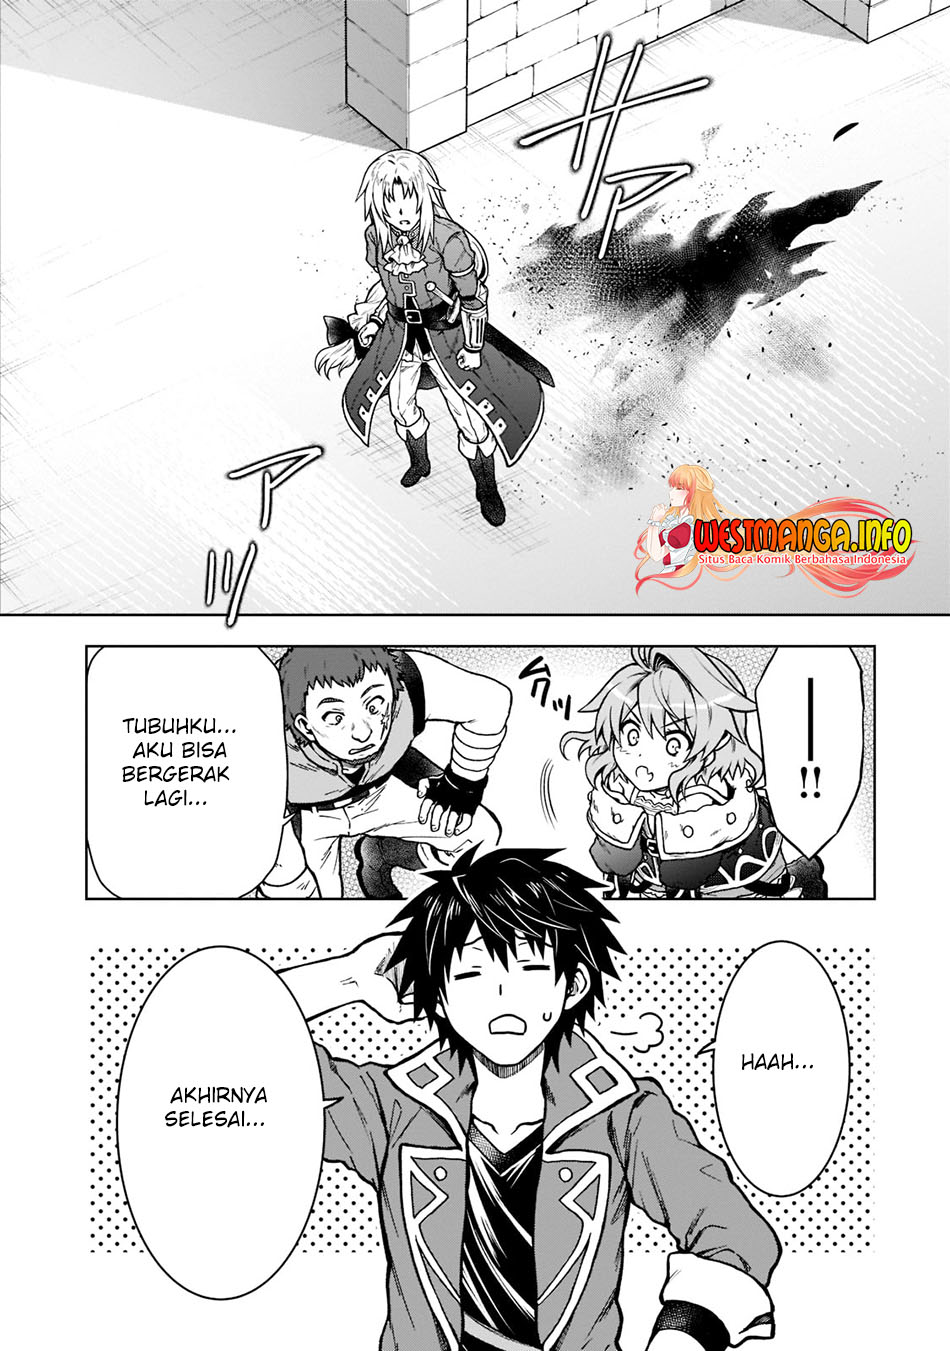 Dilarang COPAS - situs resmi www.mangacanblog.com - Komik d rank adventurer invited by a brave party and the stalking princess 011 - chapter 11 12 Indonesia d rank adventurer invited by a brave party and the stalking princess 011 - chapter 11 Terbaru 23|Baca Manga Komik Indonesia|Mangacan